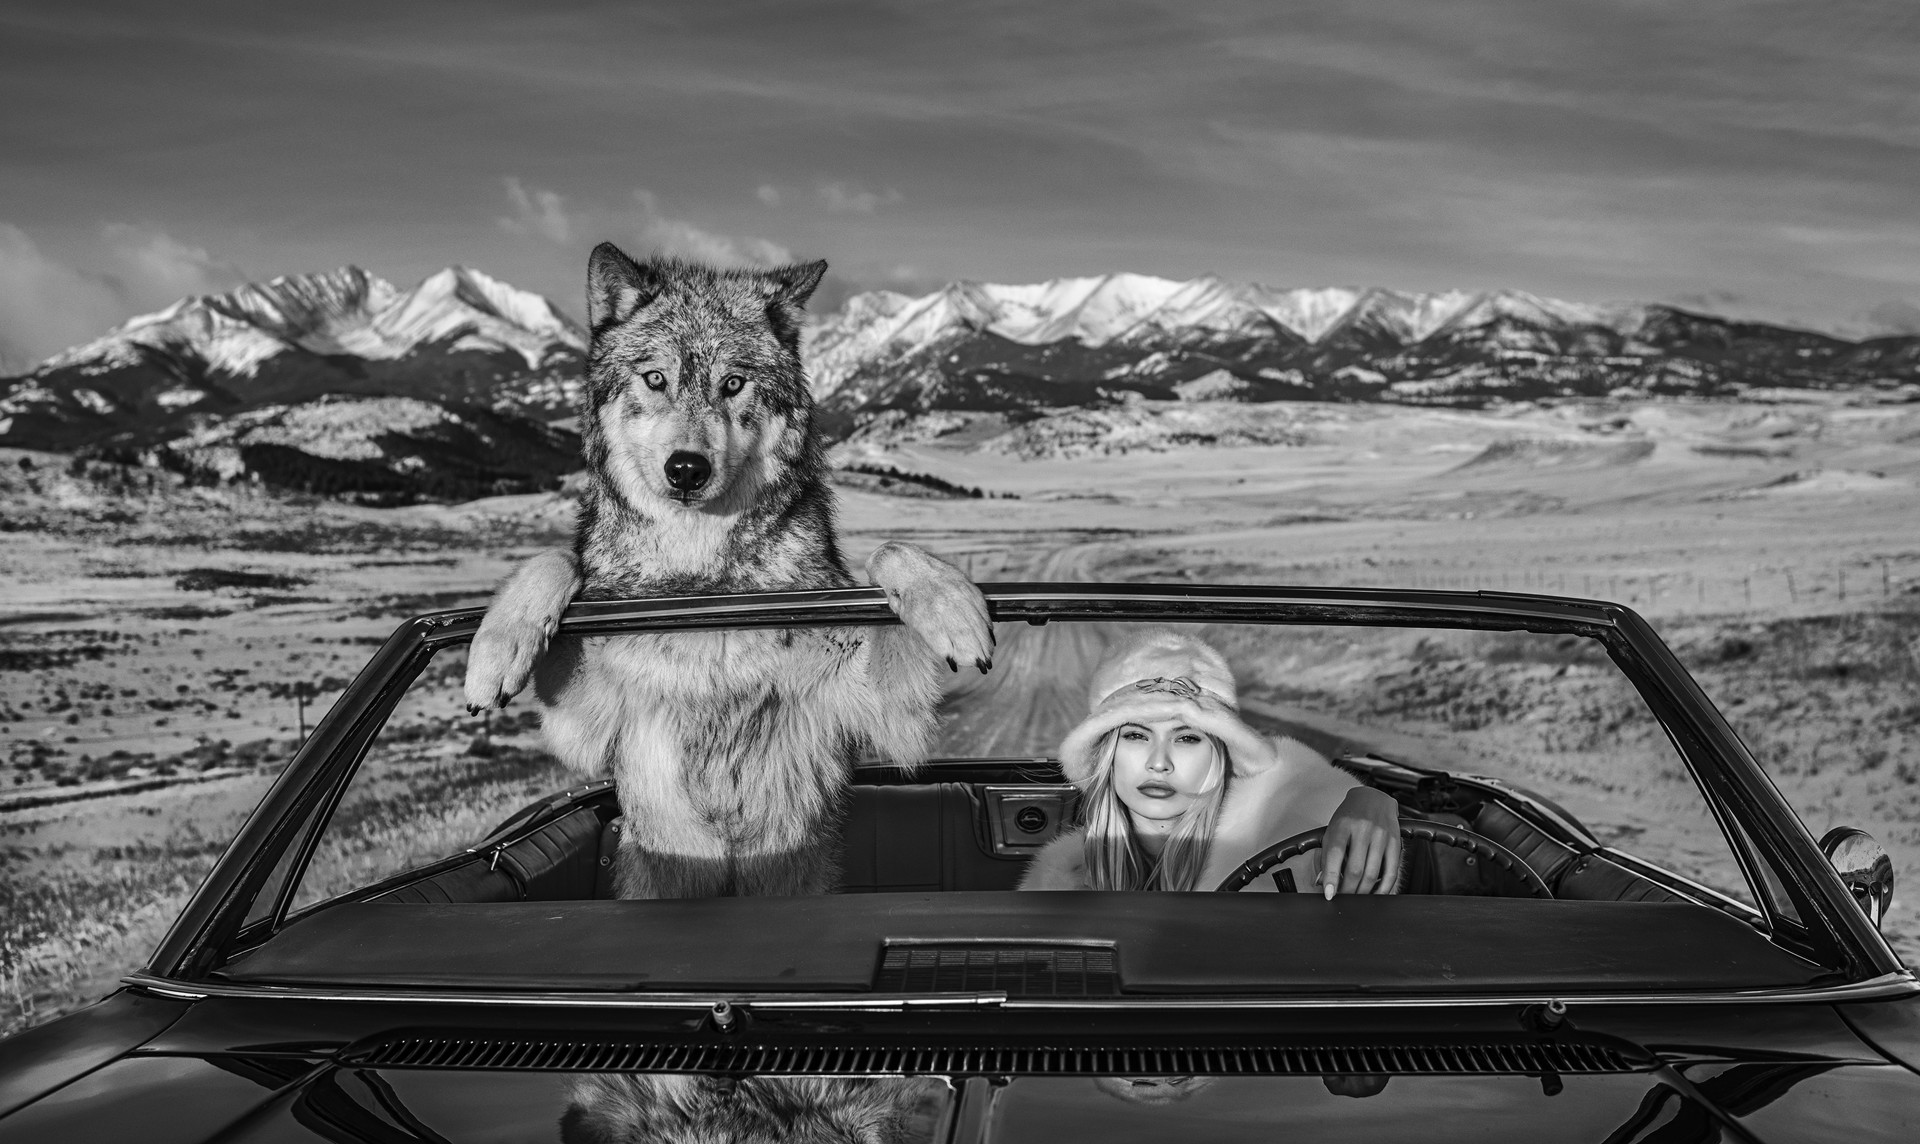 Once Upon a Time in the West by David Yarrow